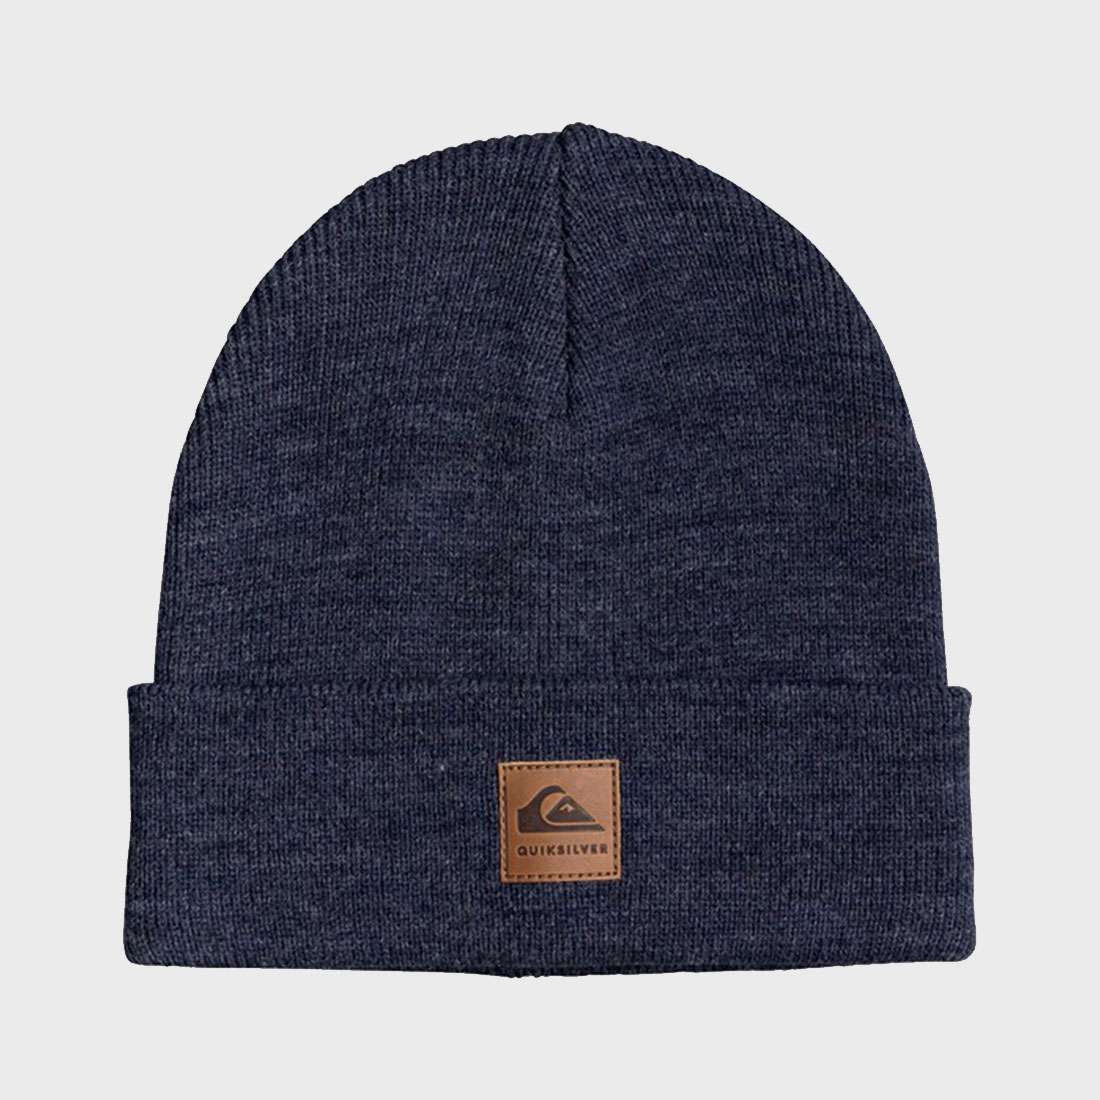 GORRO QUIKSILVER PERFORMER 2 BYP0